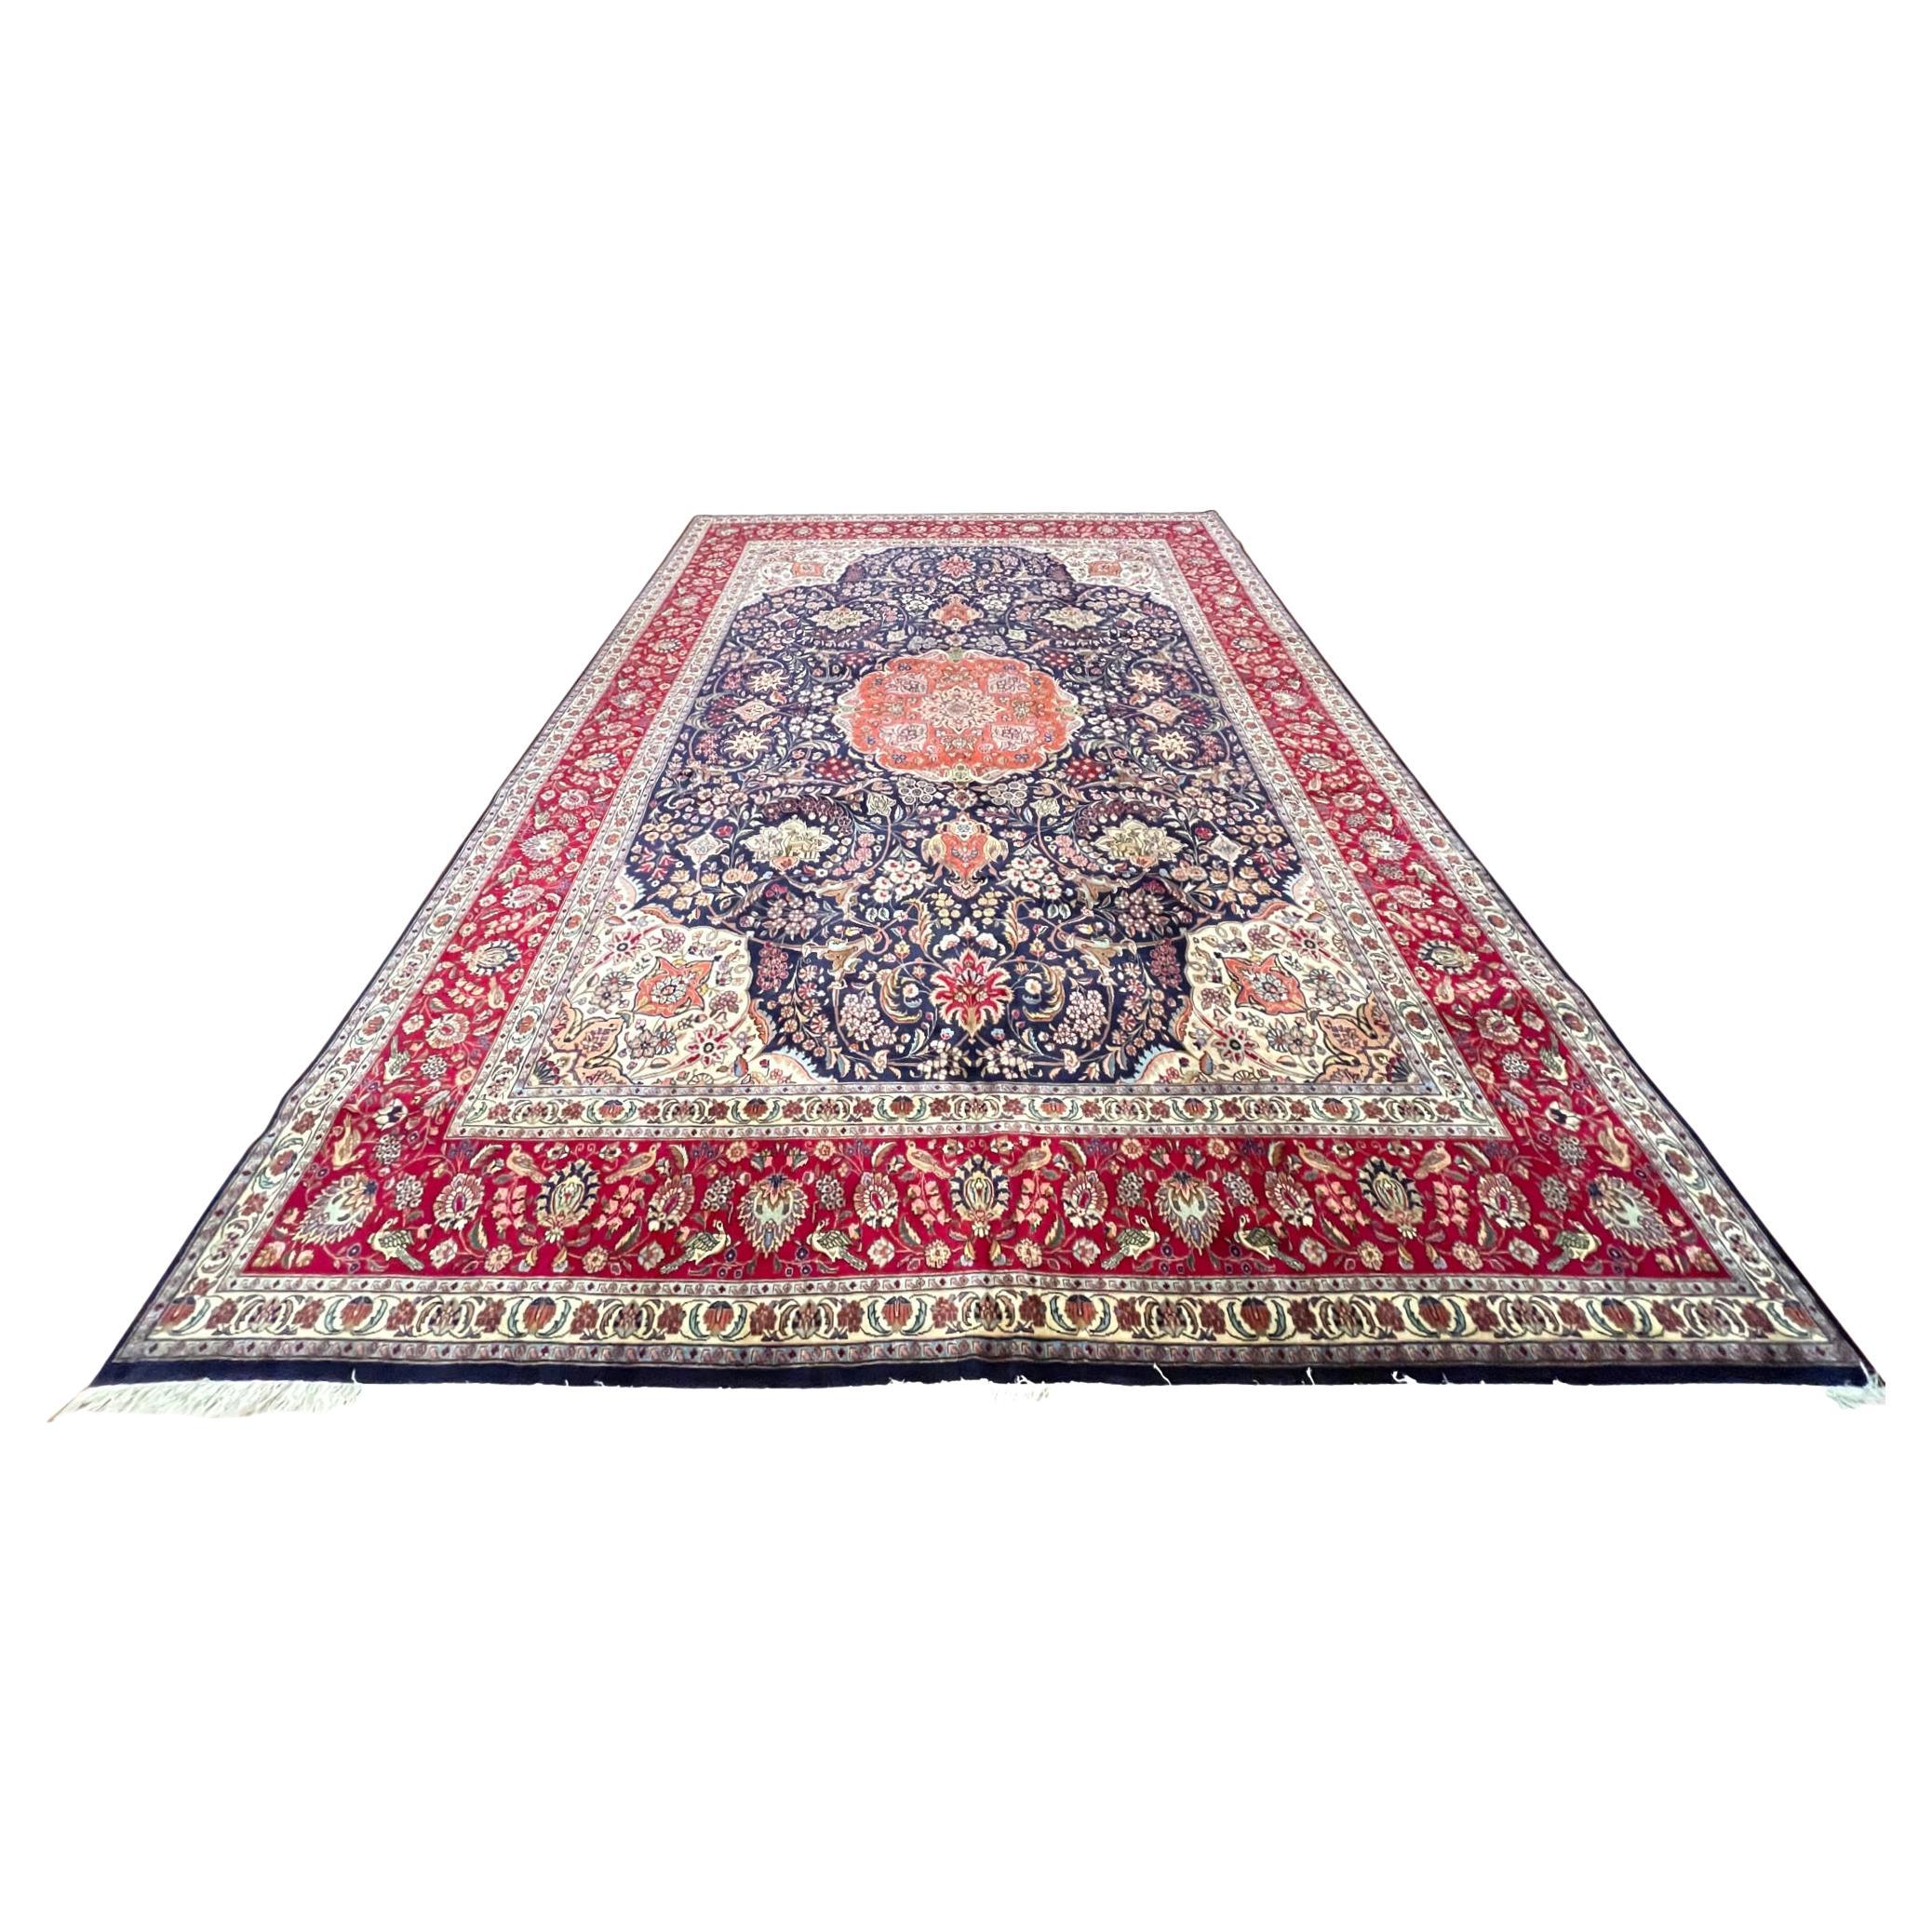 Authentic Persian Hand Knotted Medallion Semi Floral Blue Red Tabriz Rug 1960 Ci For Sale